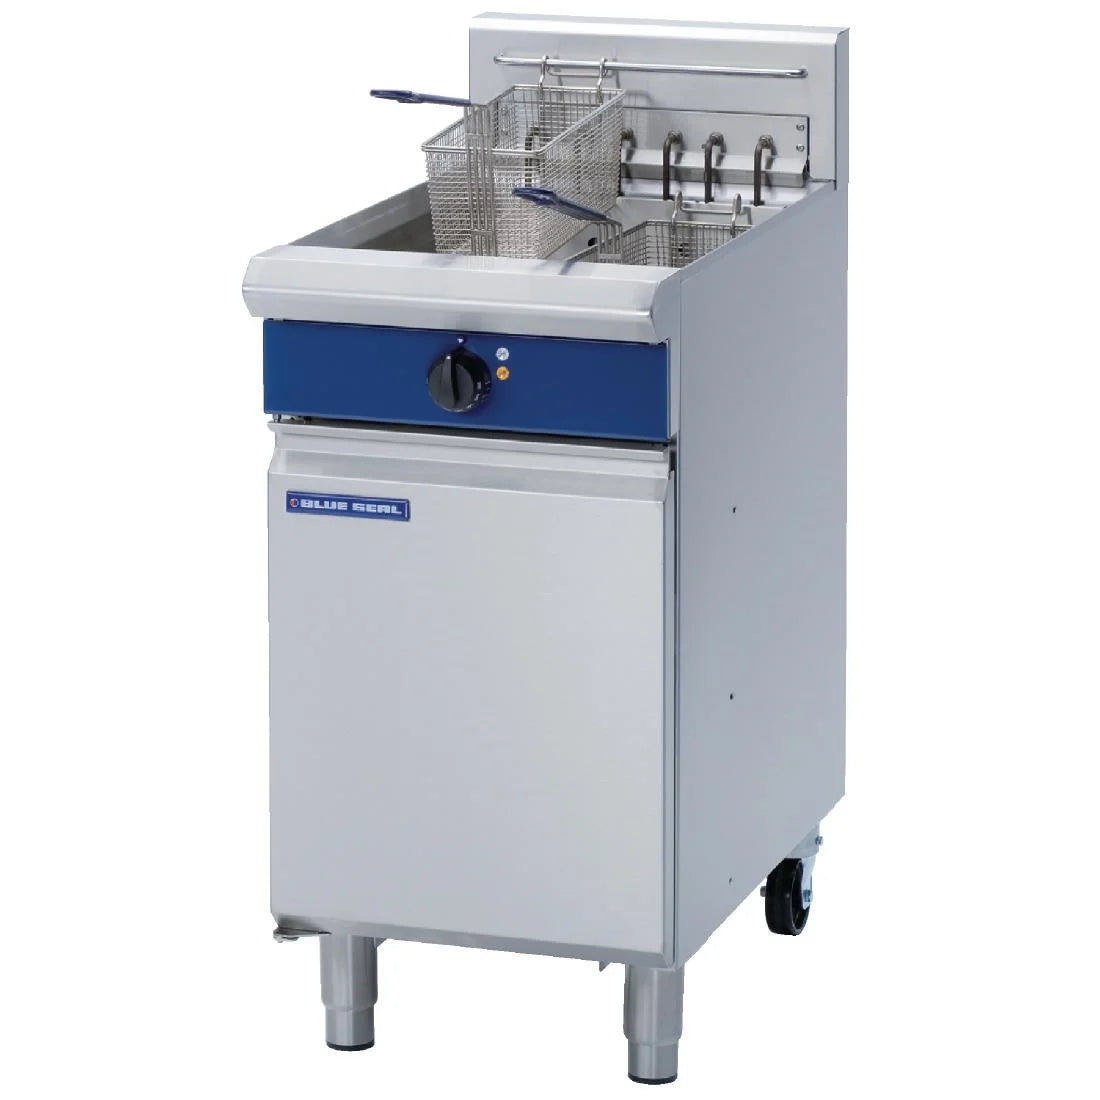 Blue Seal E43 Single Tank Twin Basket Free Standing Electric Fryer .Product Ref:00614.Model: E43. 🚚 3-5 DAYS Delivery